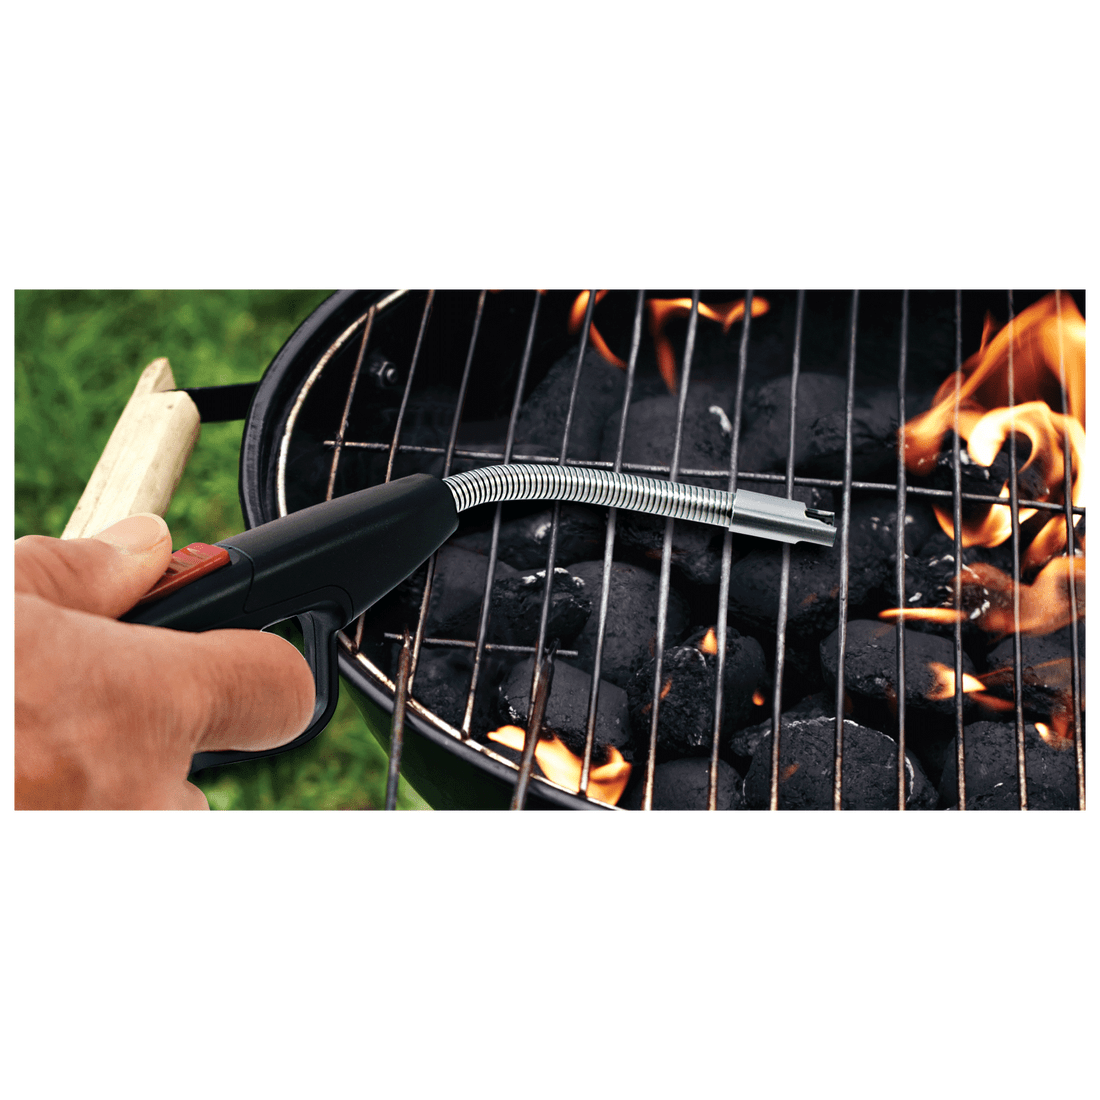 Rechargeable USB SmartIgnition Eco-Friendly Candle Grill BBQ Lighter with Bendable Neck